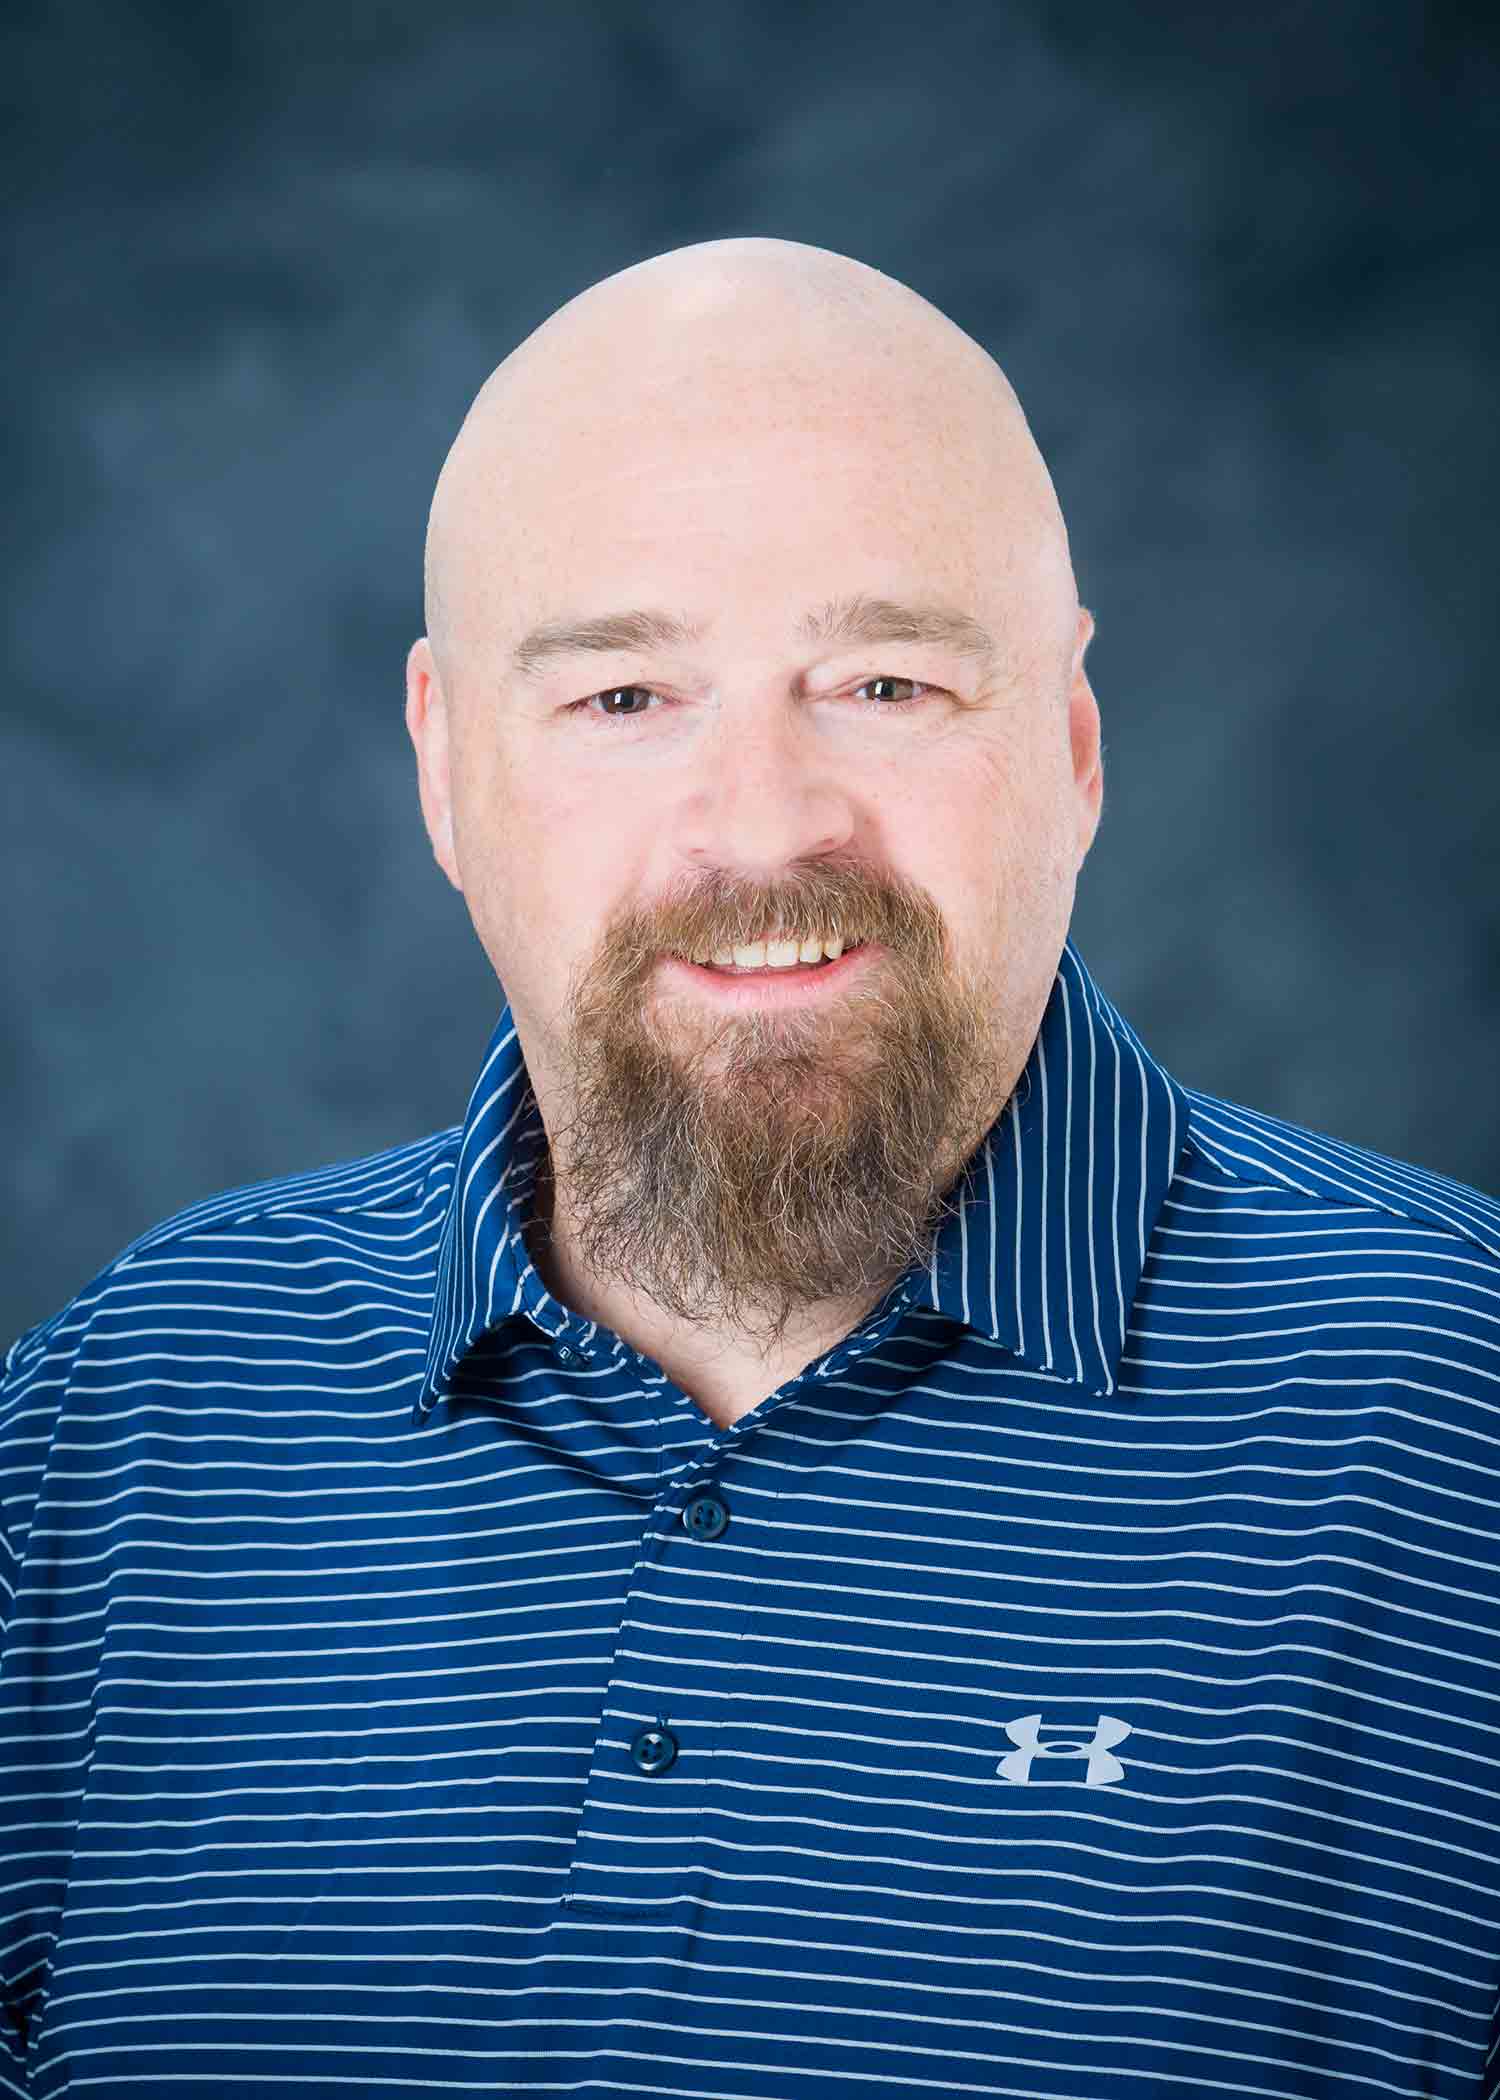 Professional photo of Mike Brown, wearing a blue shirt against a blue background.